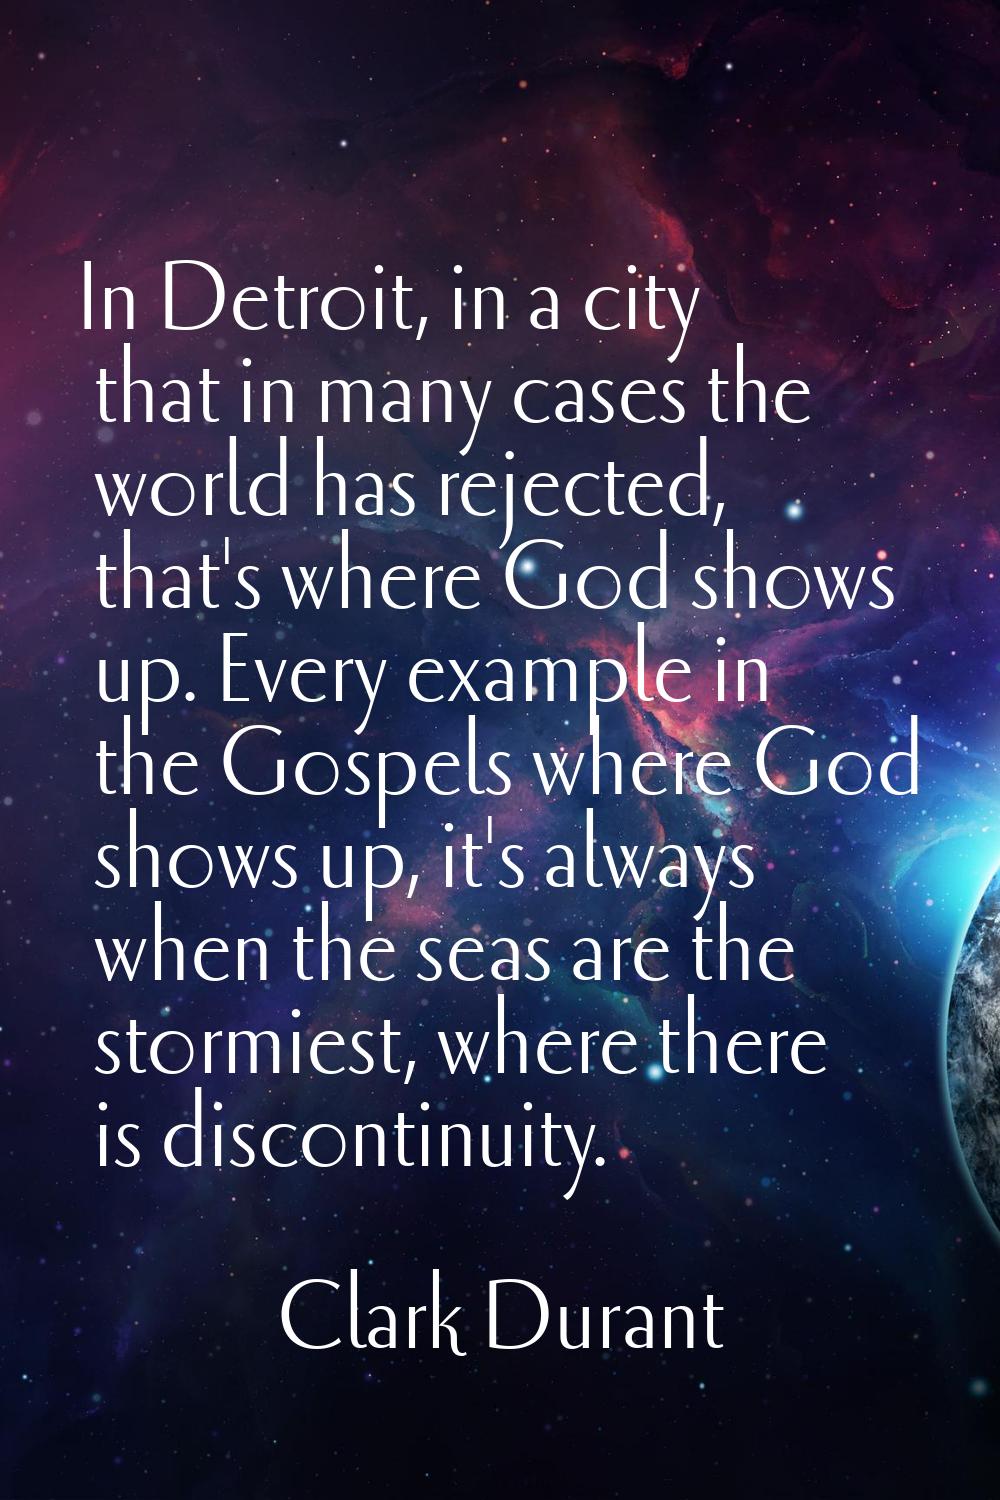 In Detroit, in a city that in many cases the world has rejected, that's where God shows up. Every e